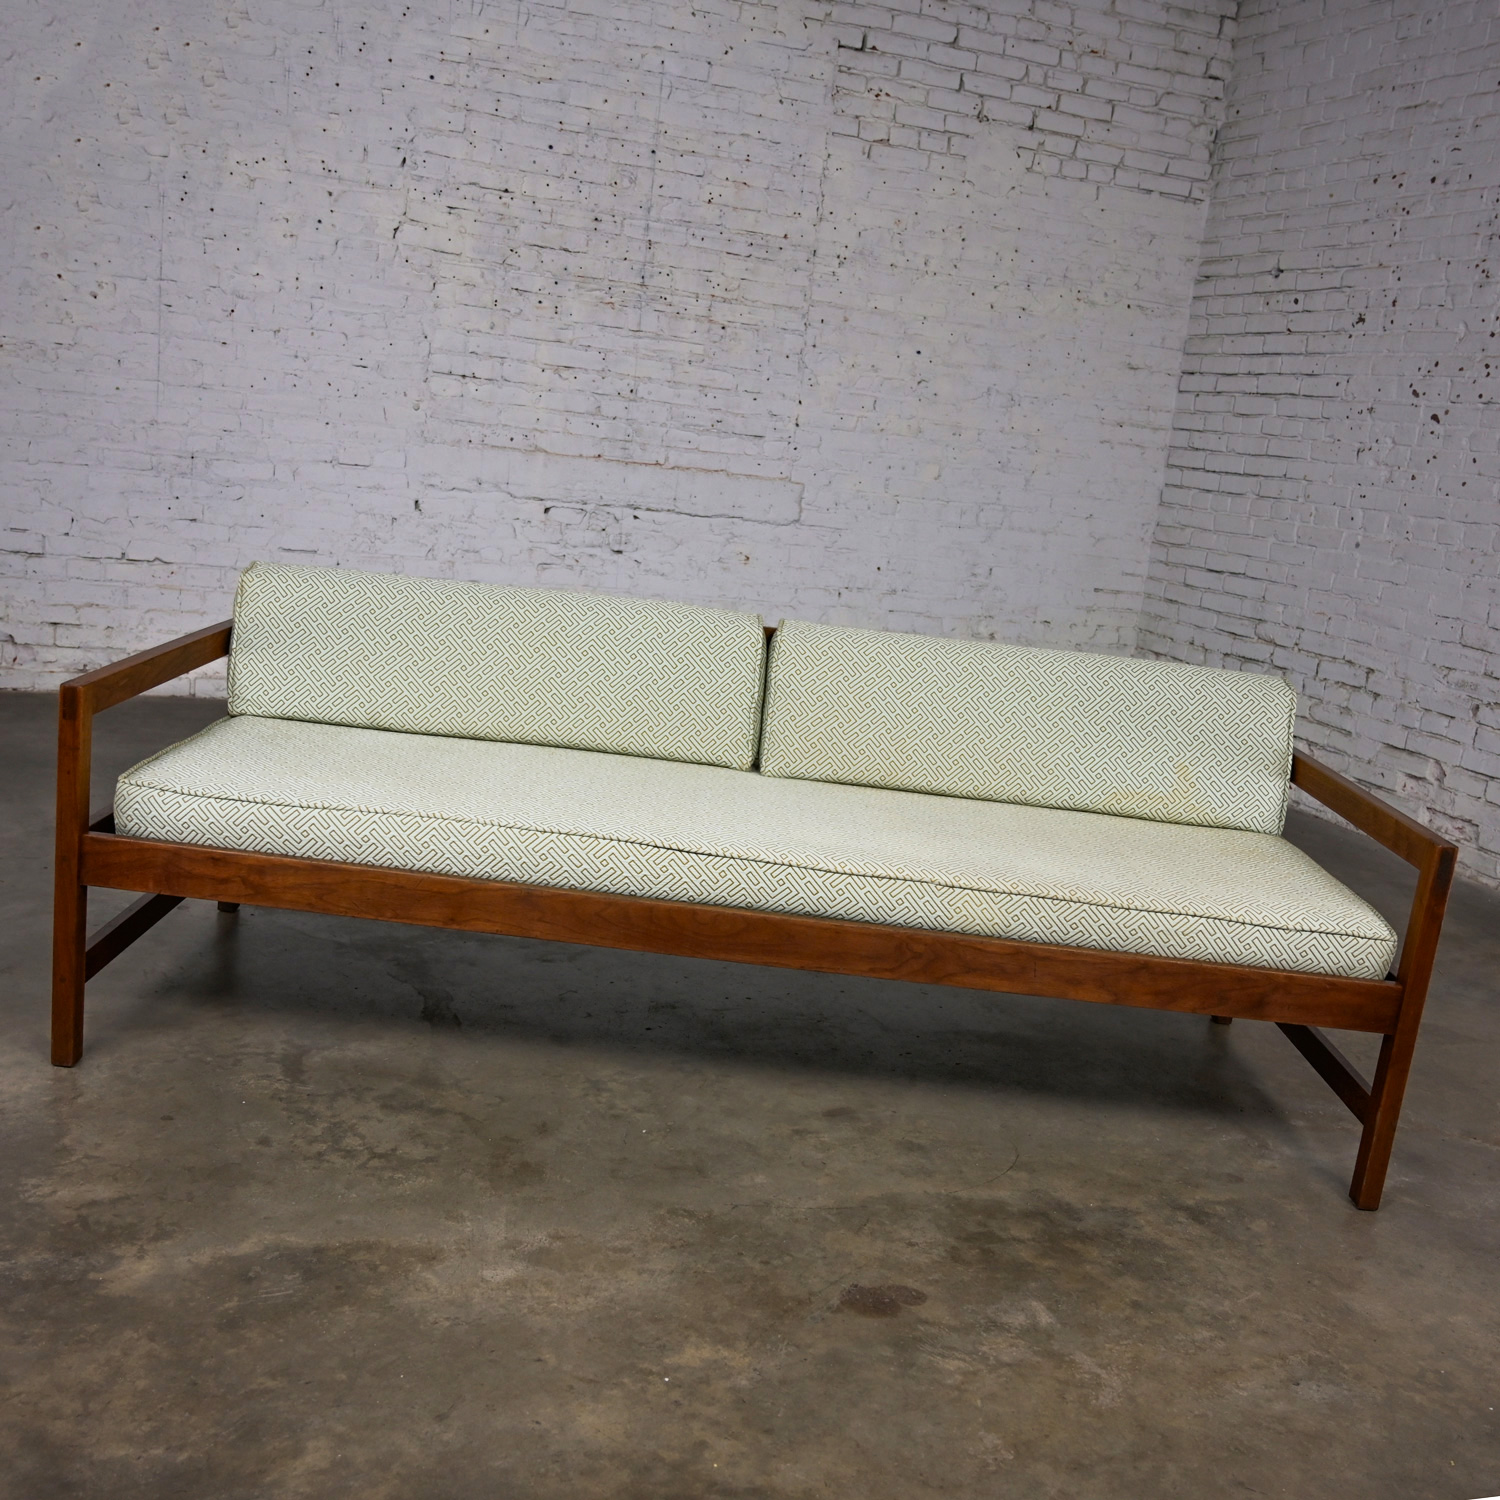 Mid-20th Century MCM Daybed Sofa Walnut Frame with Arms & Gray-Blue Upholstery & Stram Springs